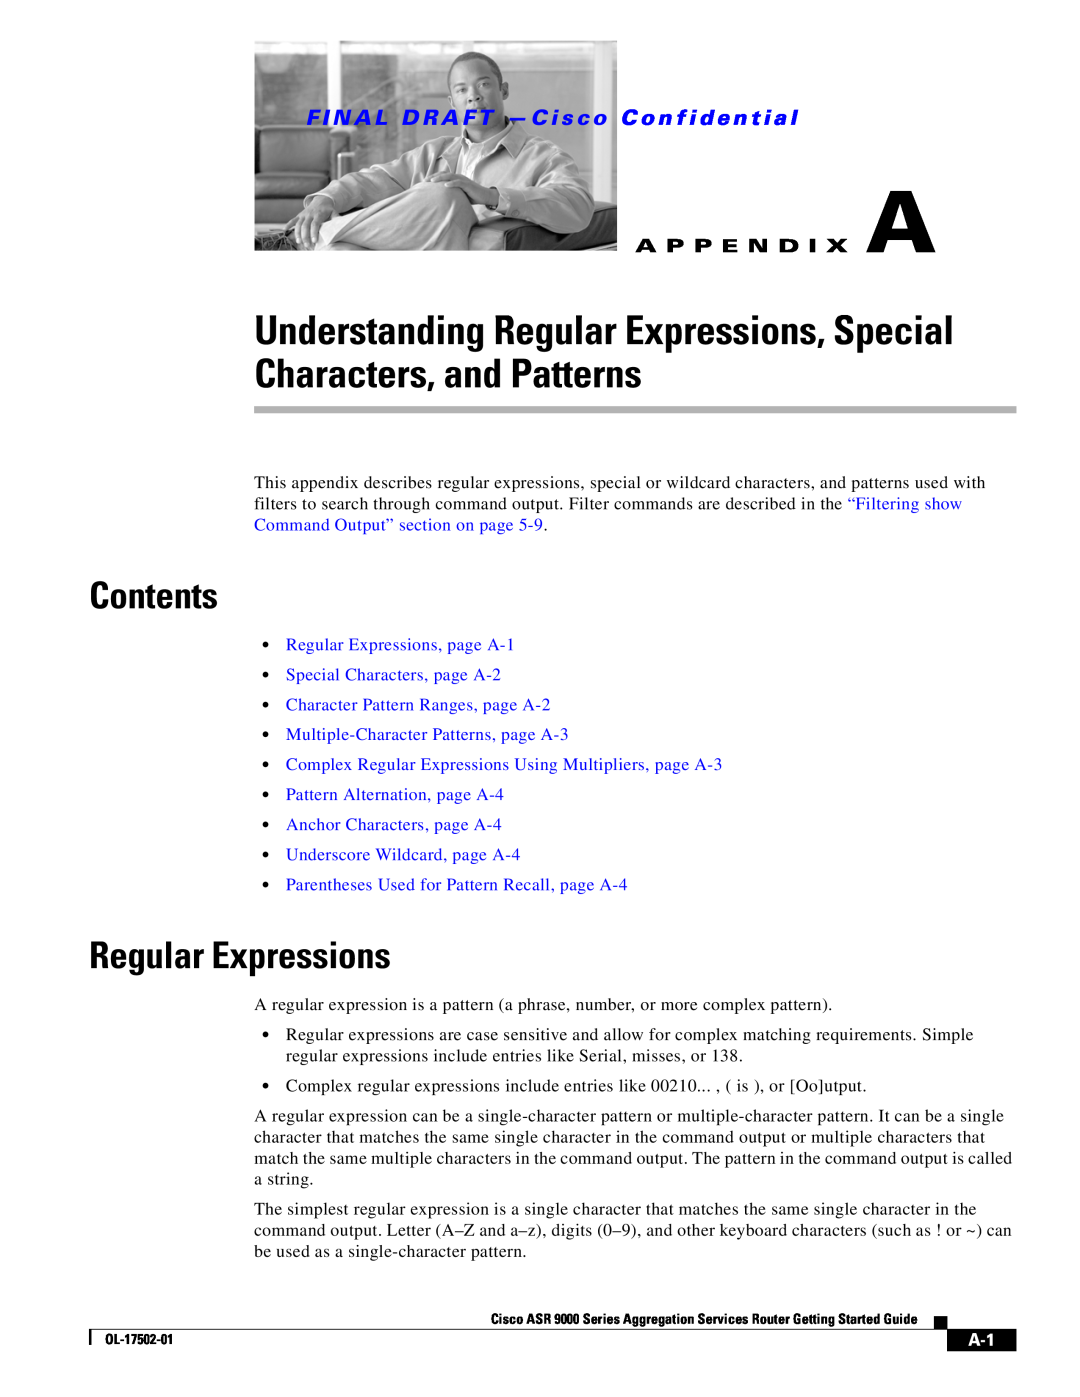 Cisco Systems A9KMOD80TR Understanding Regular Expressions, Special Characters, and Patterns, A P P E N D I X A, Contents 